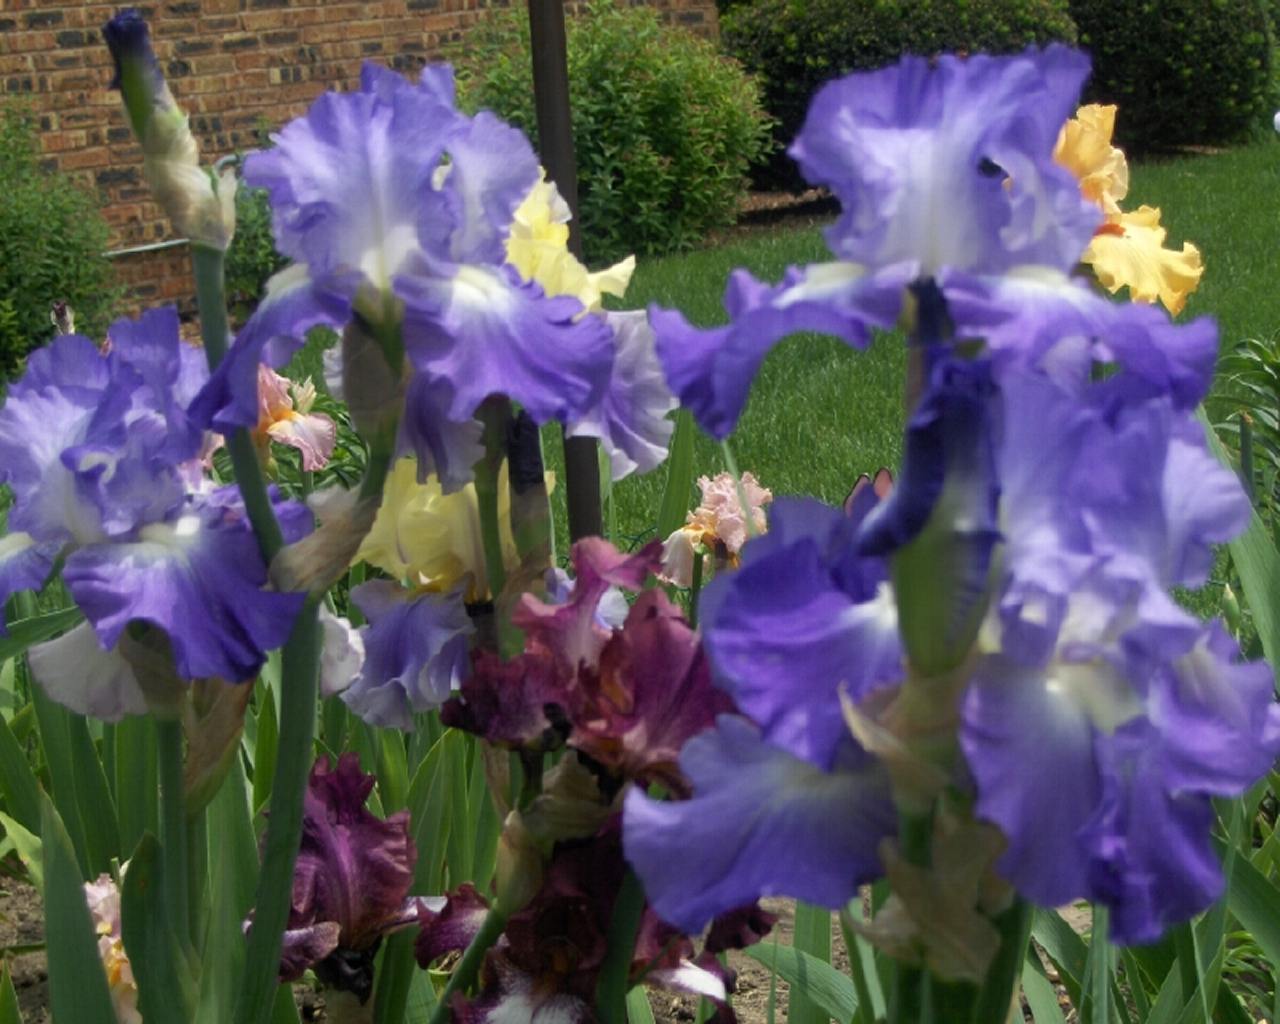 Alighthouse.com Iris Flower Flash Jigsaw Games Puzzle of the Month